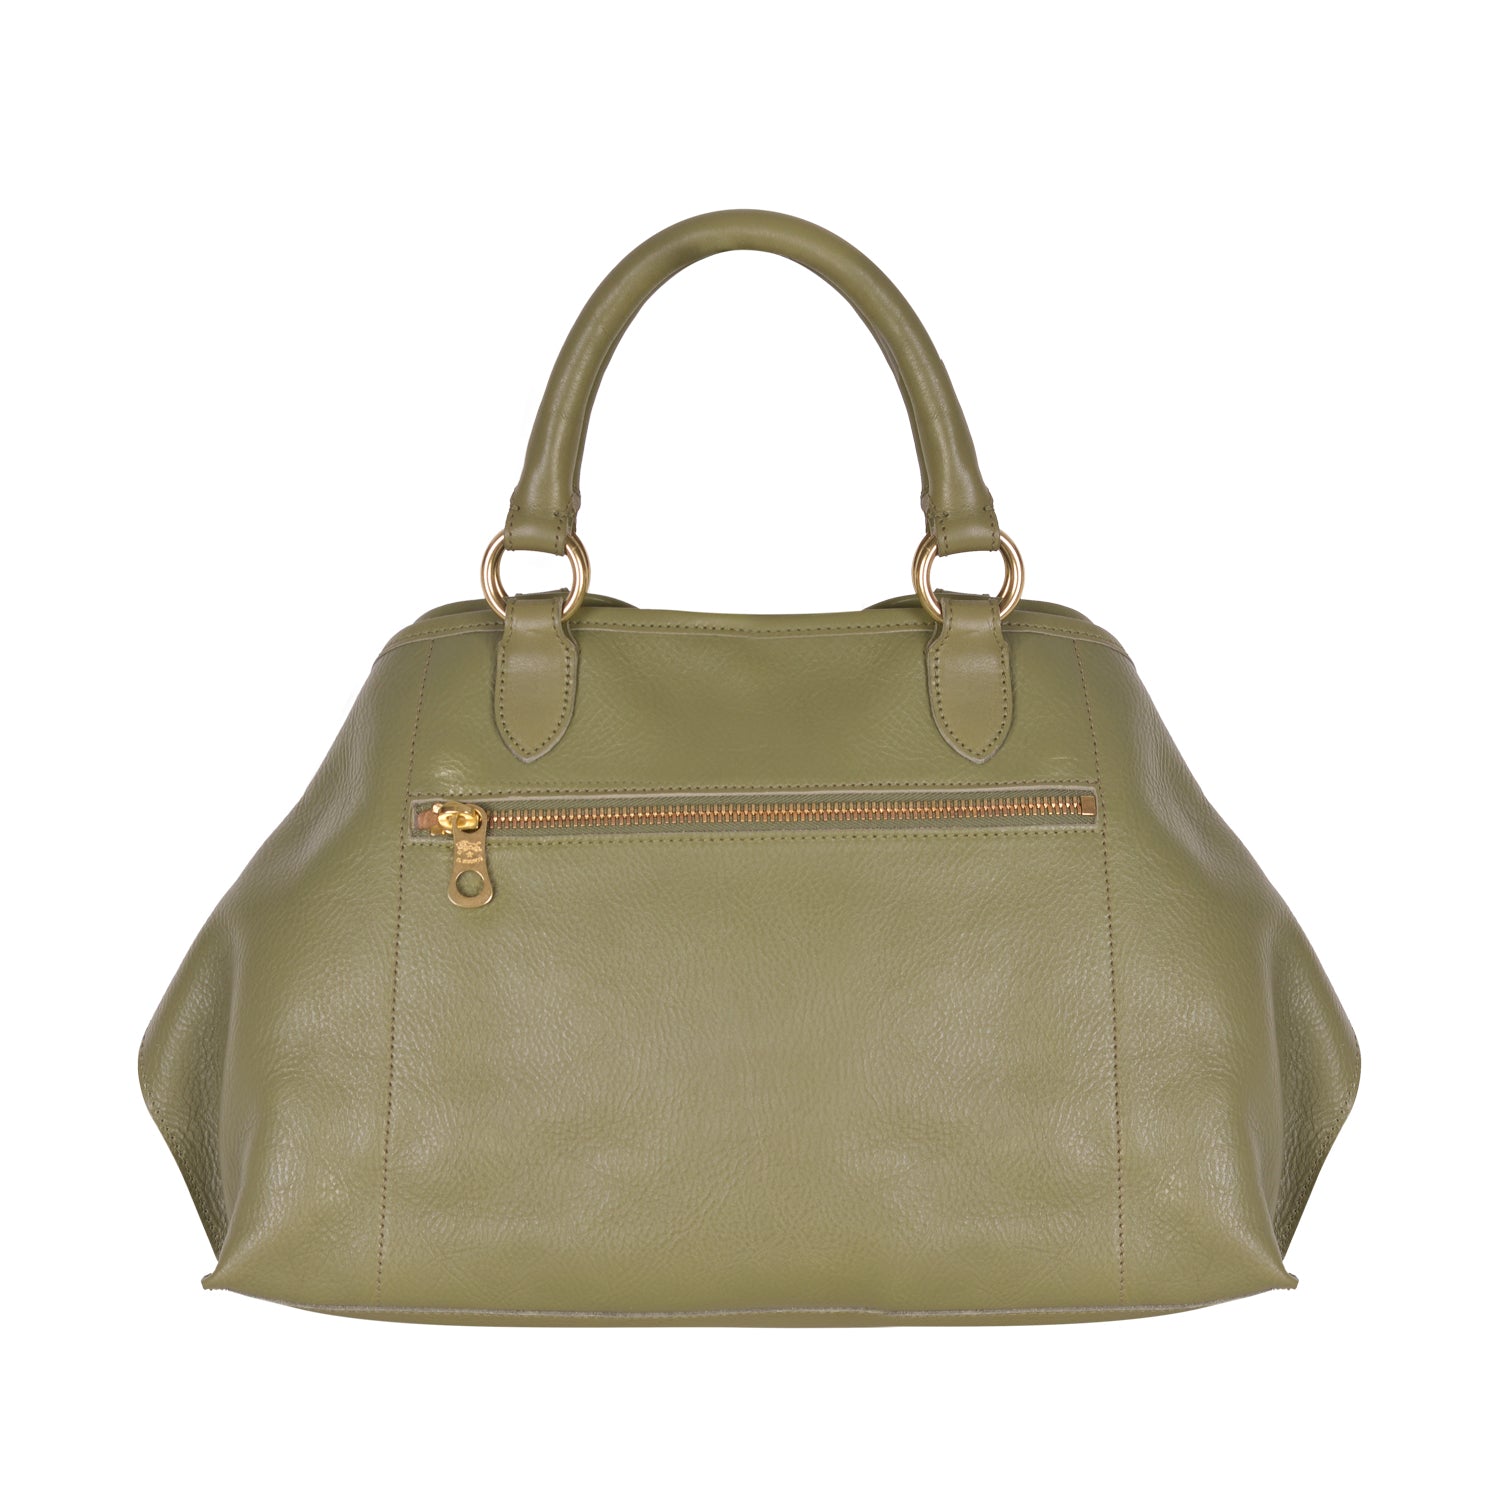 NEW IL BISONTE WOMEN'S SAVAGE COLLECTION HANDBAG IN OLIVE LEATHER